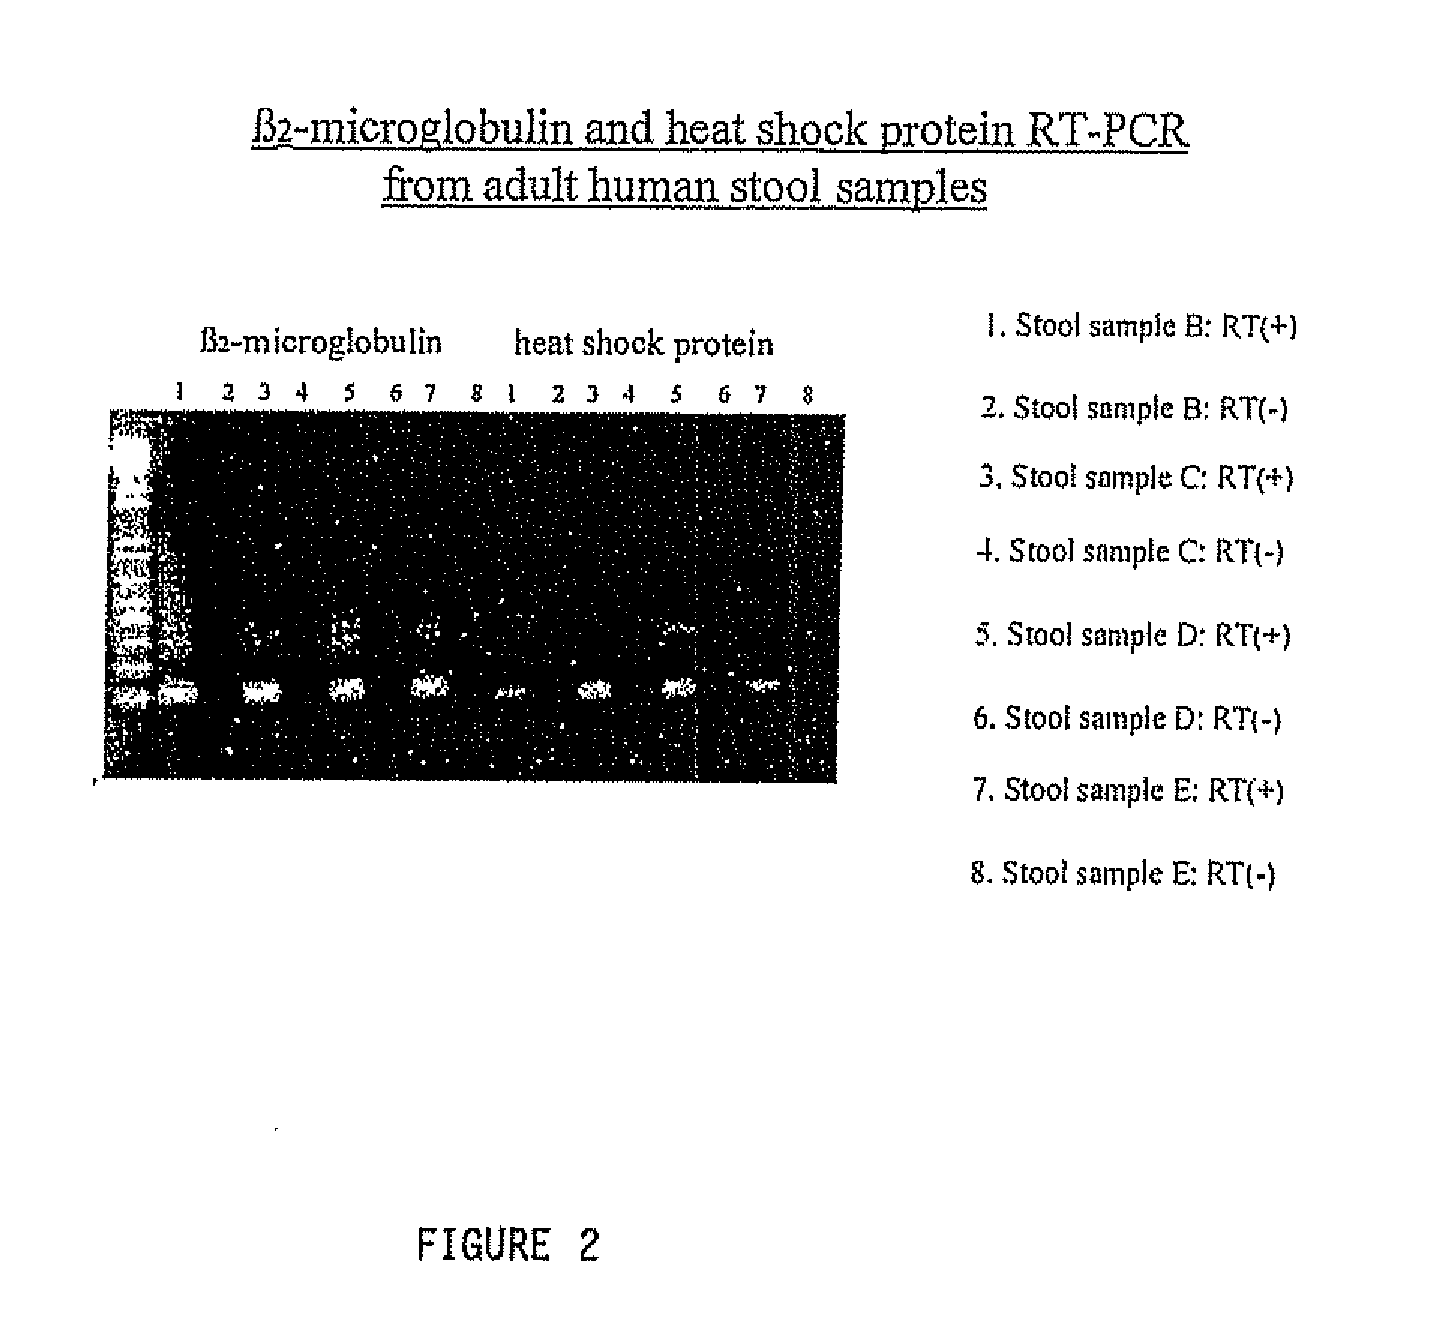 Method of isolating nucleic acids from stool samples